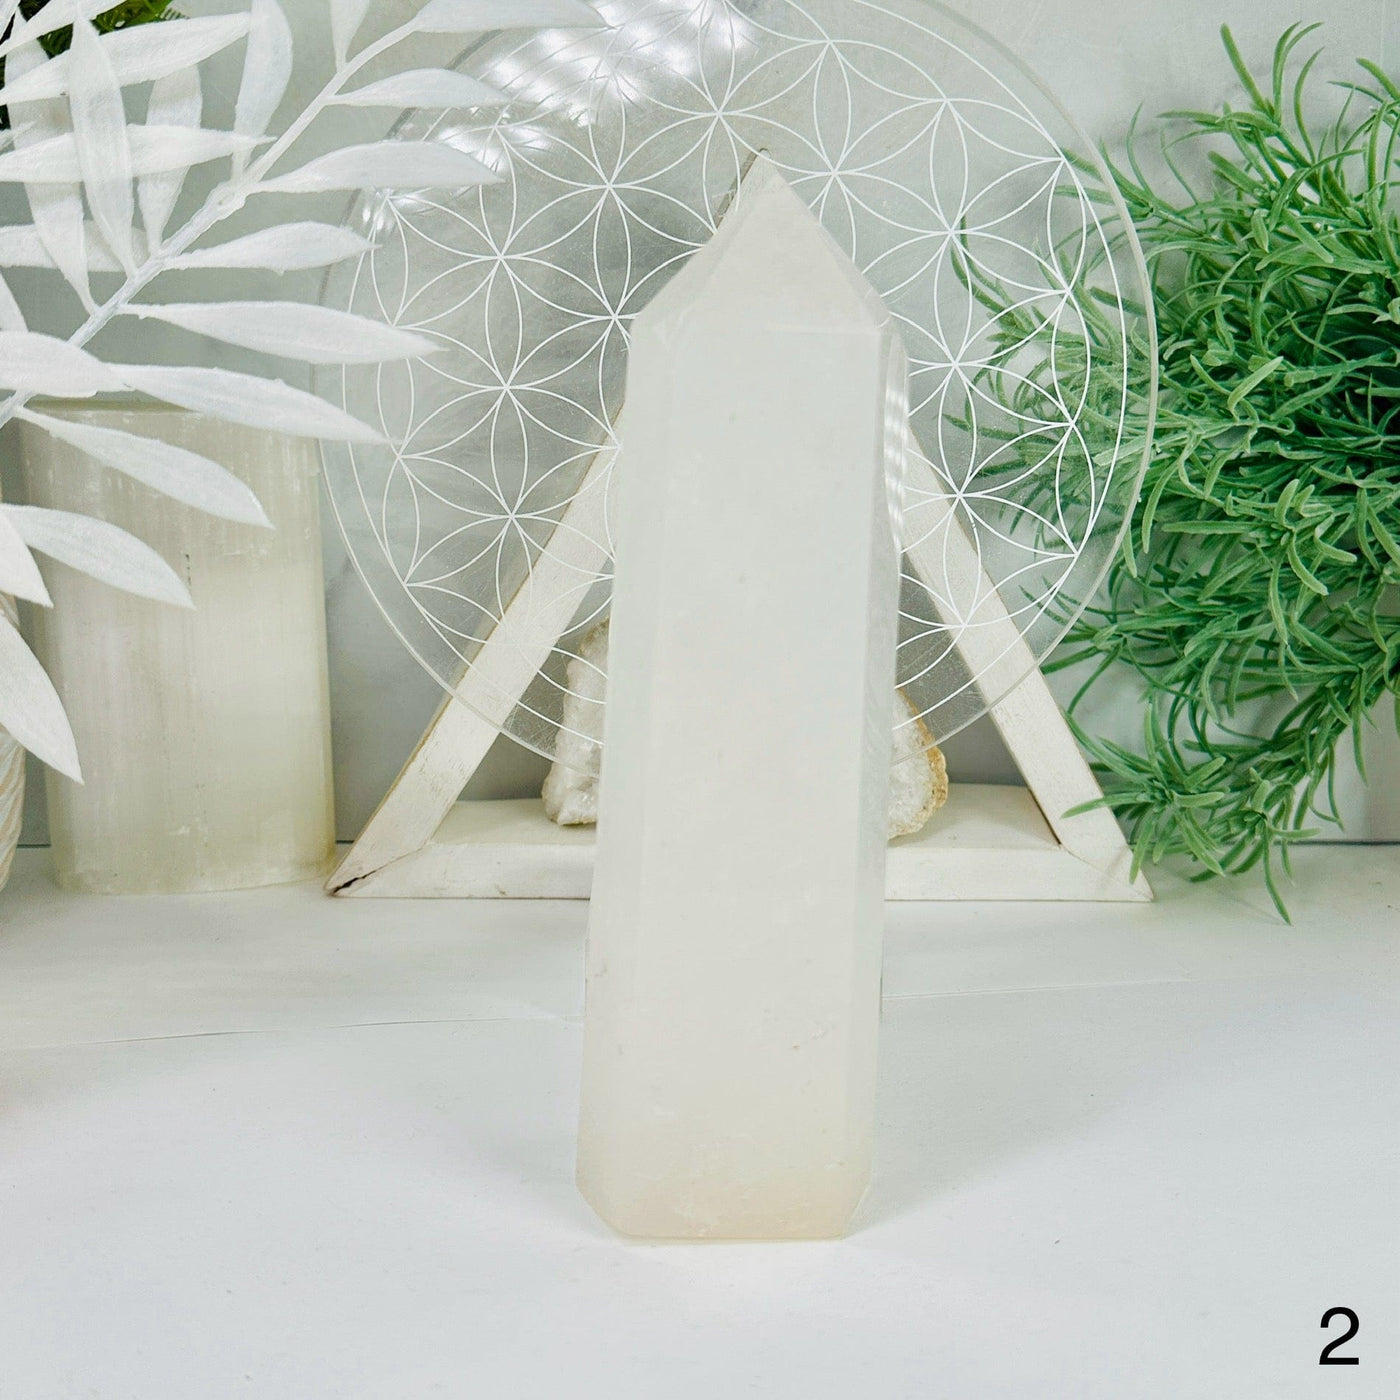  Crystal Quartz Tower - You Choose tower 2 labeled